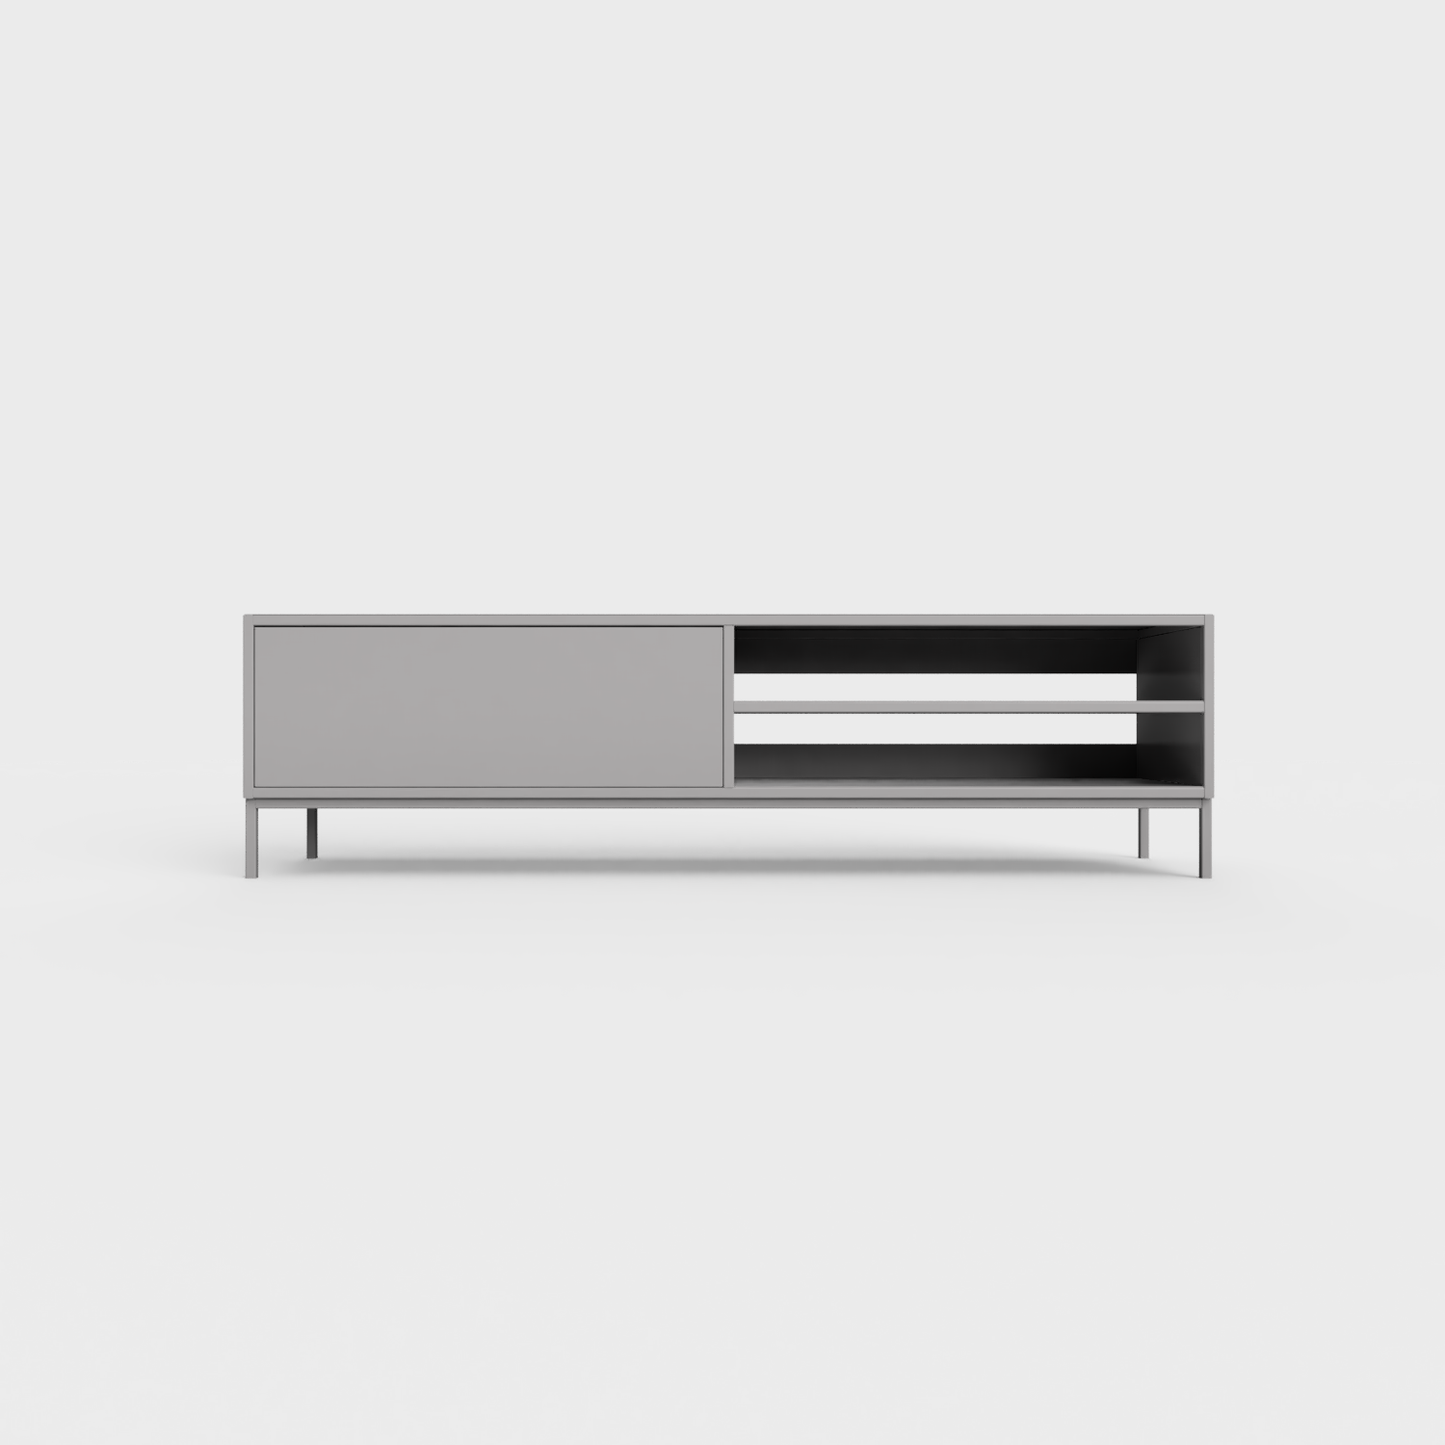 Prunus 02 Lowboard in Ashen Gray color, powder-coated steel, elegant and modern piece of furniture for your living room